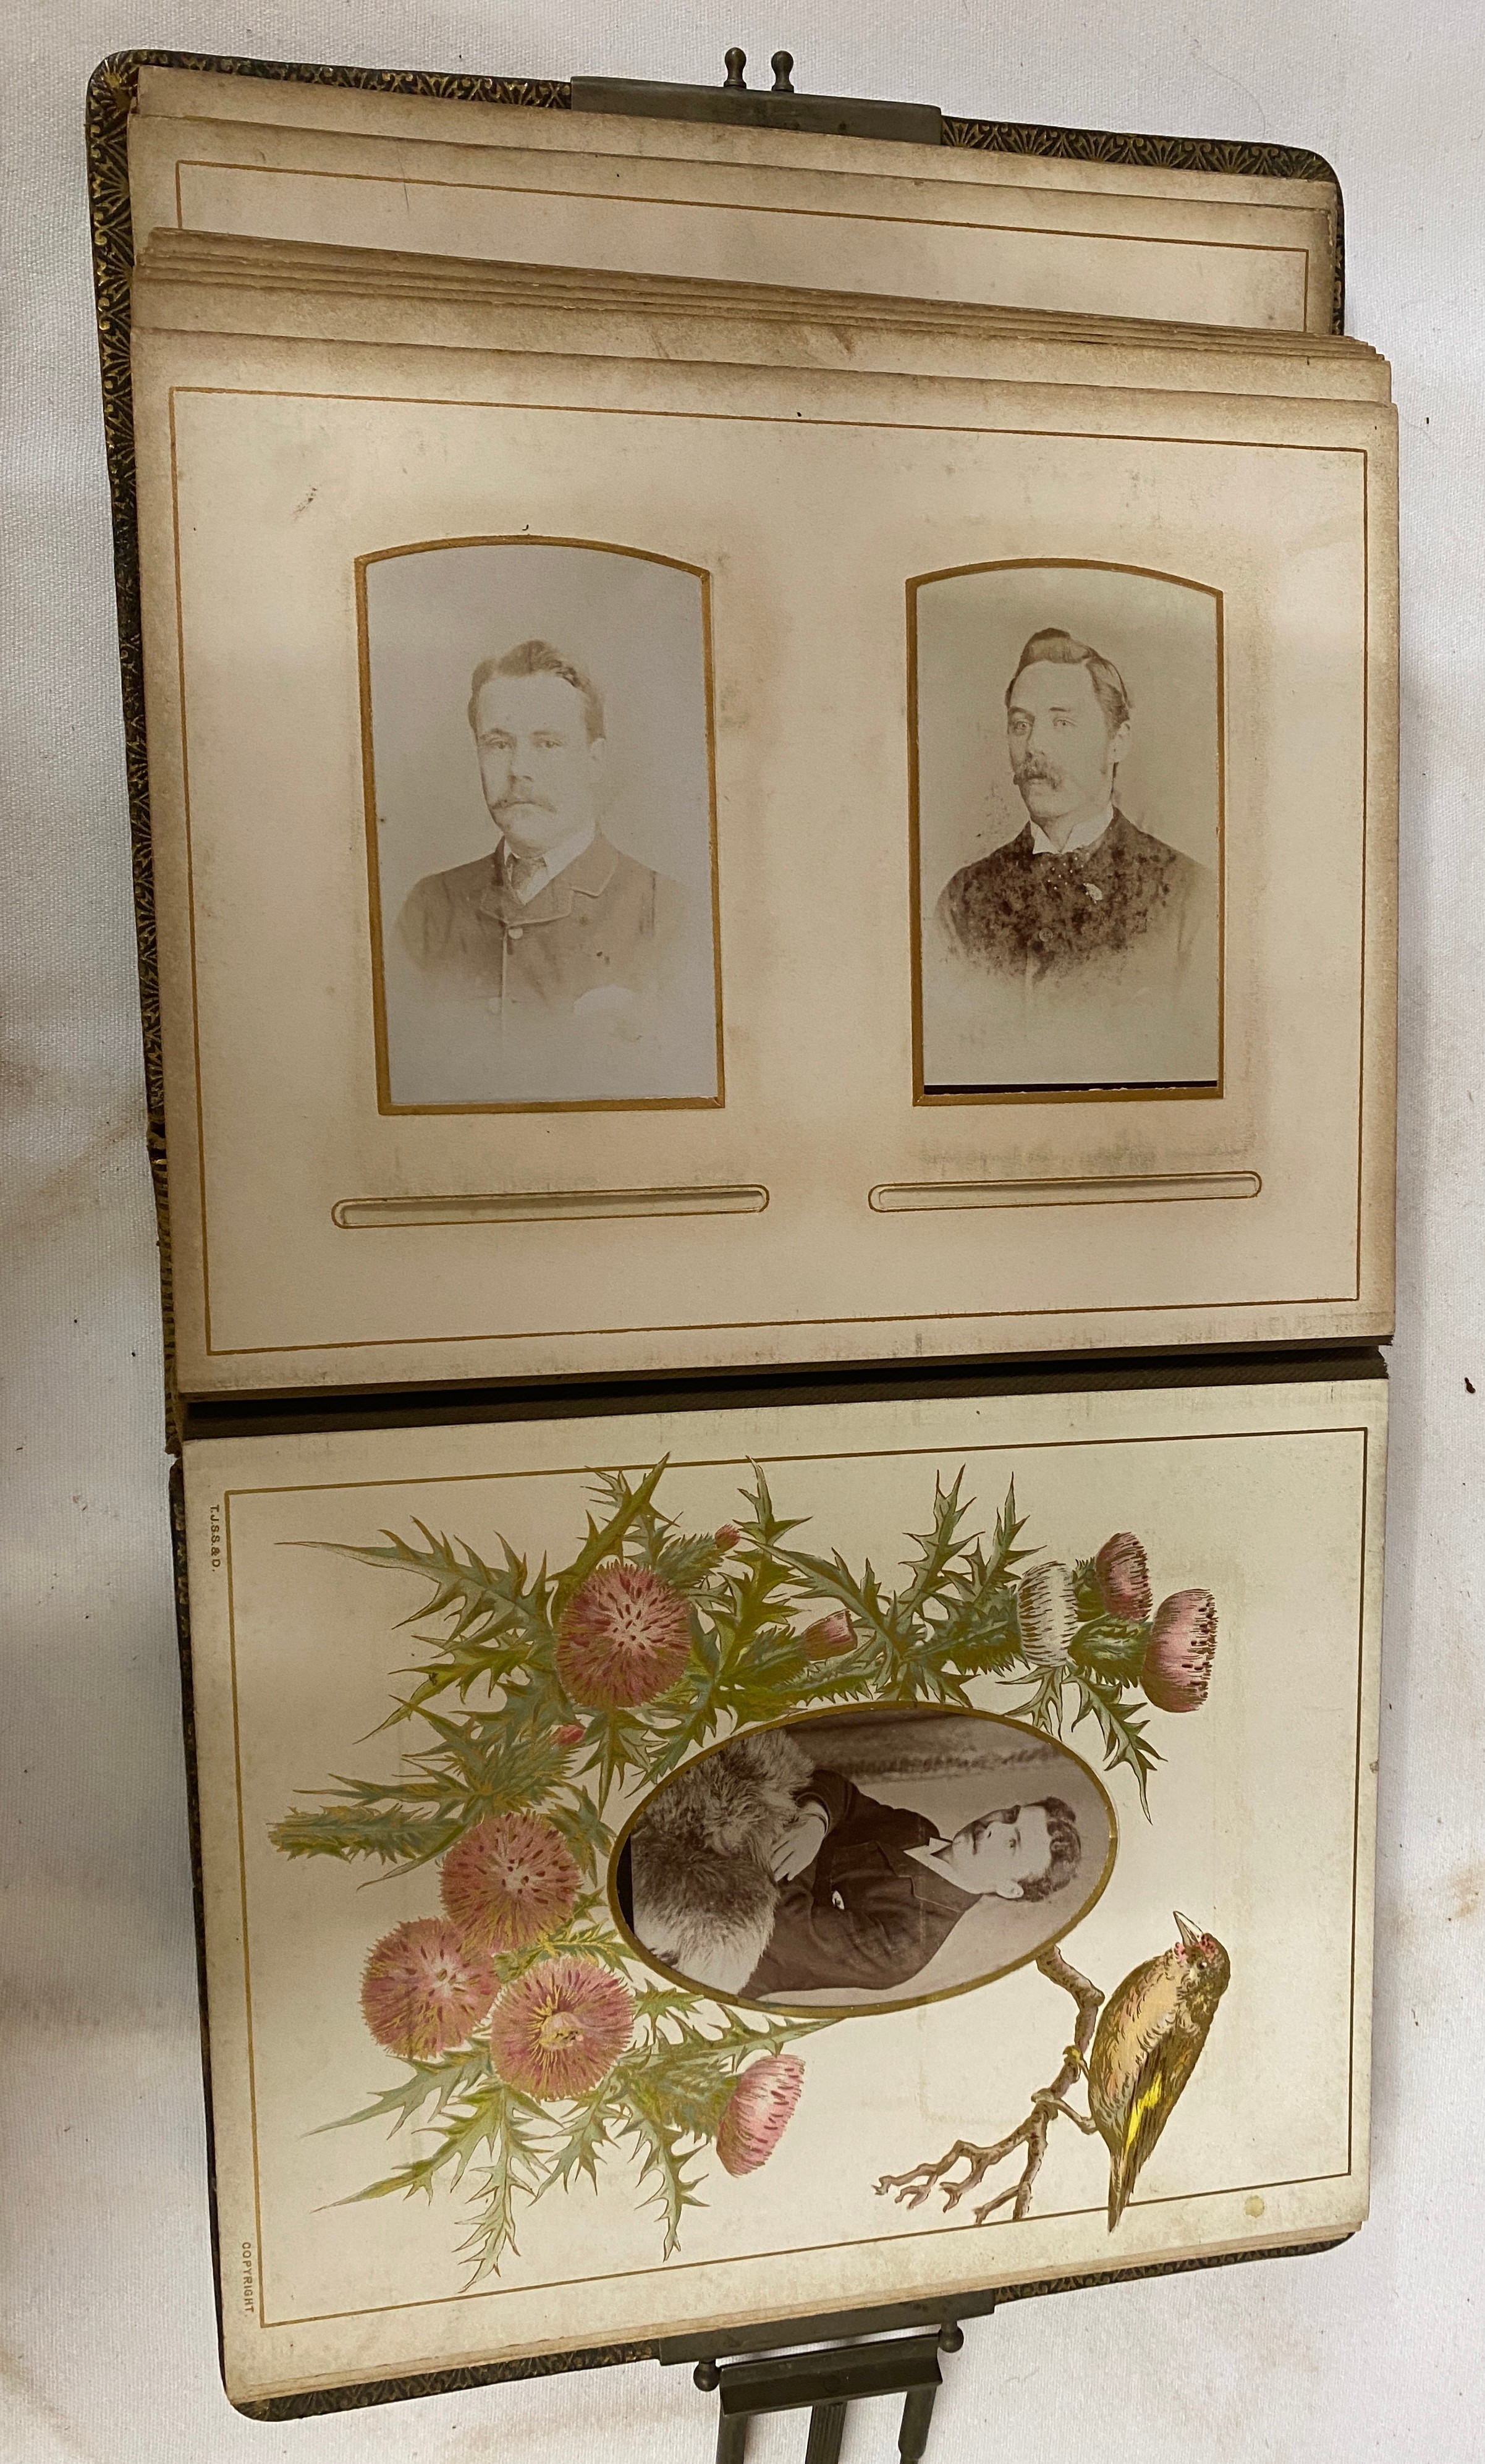 Photograph albums; Saltley College X'mas 1887 presented to Thomas Withers by his fellow students - Image 23 of 30